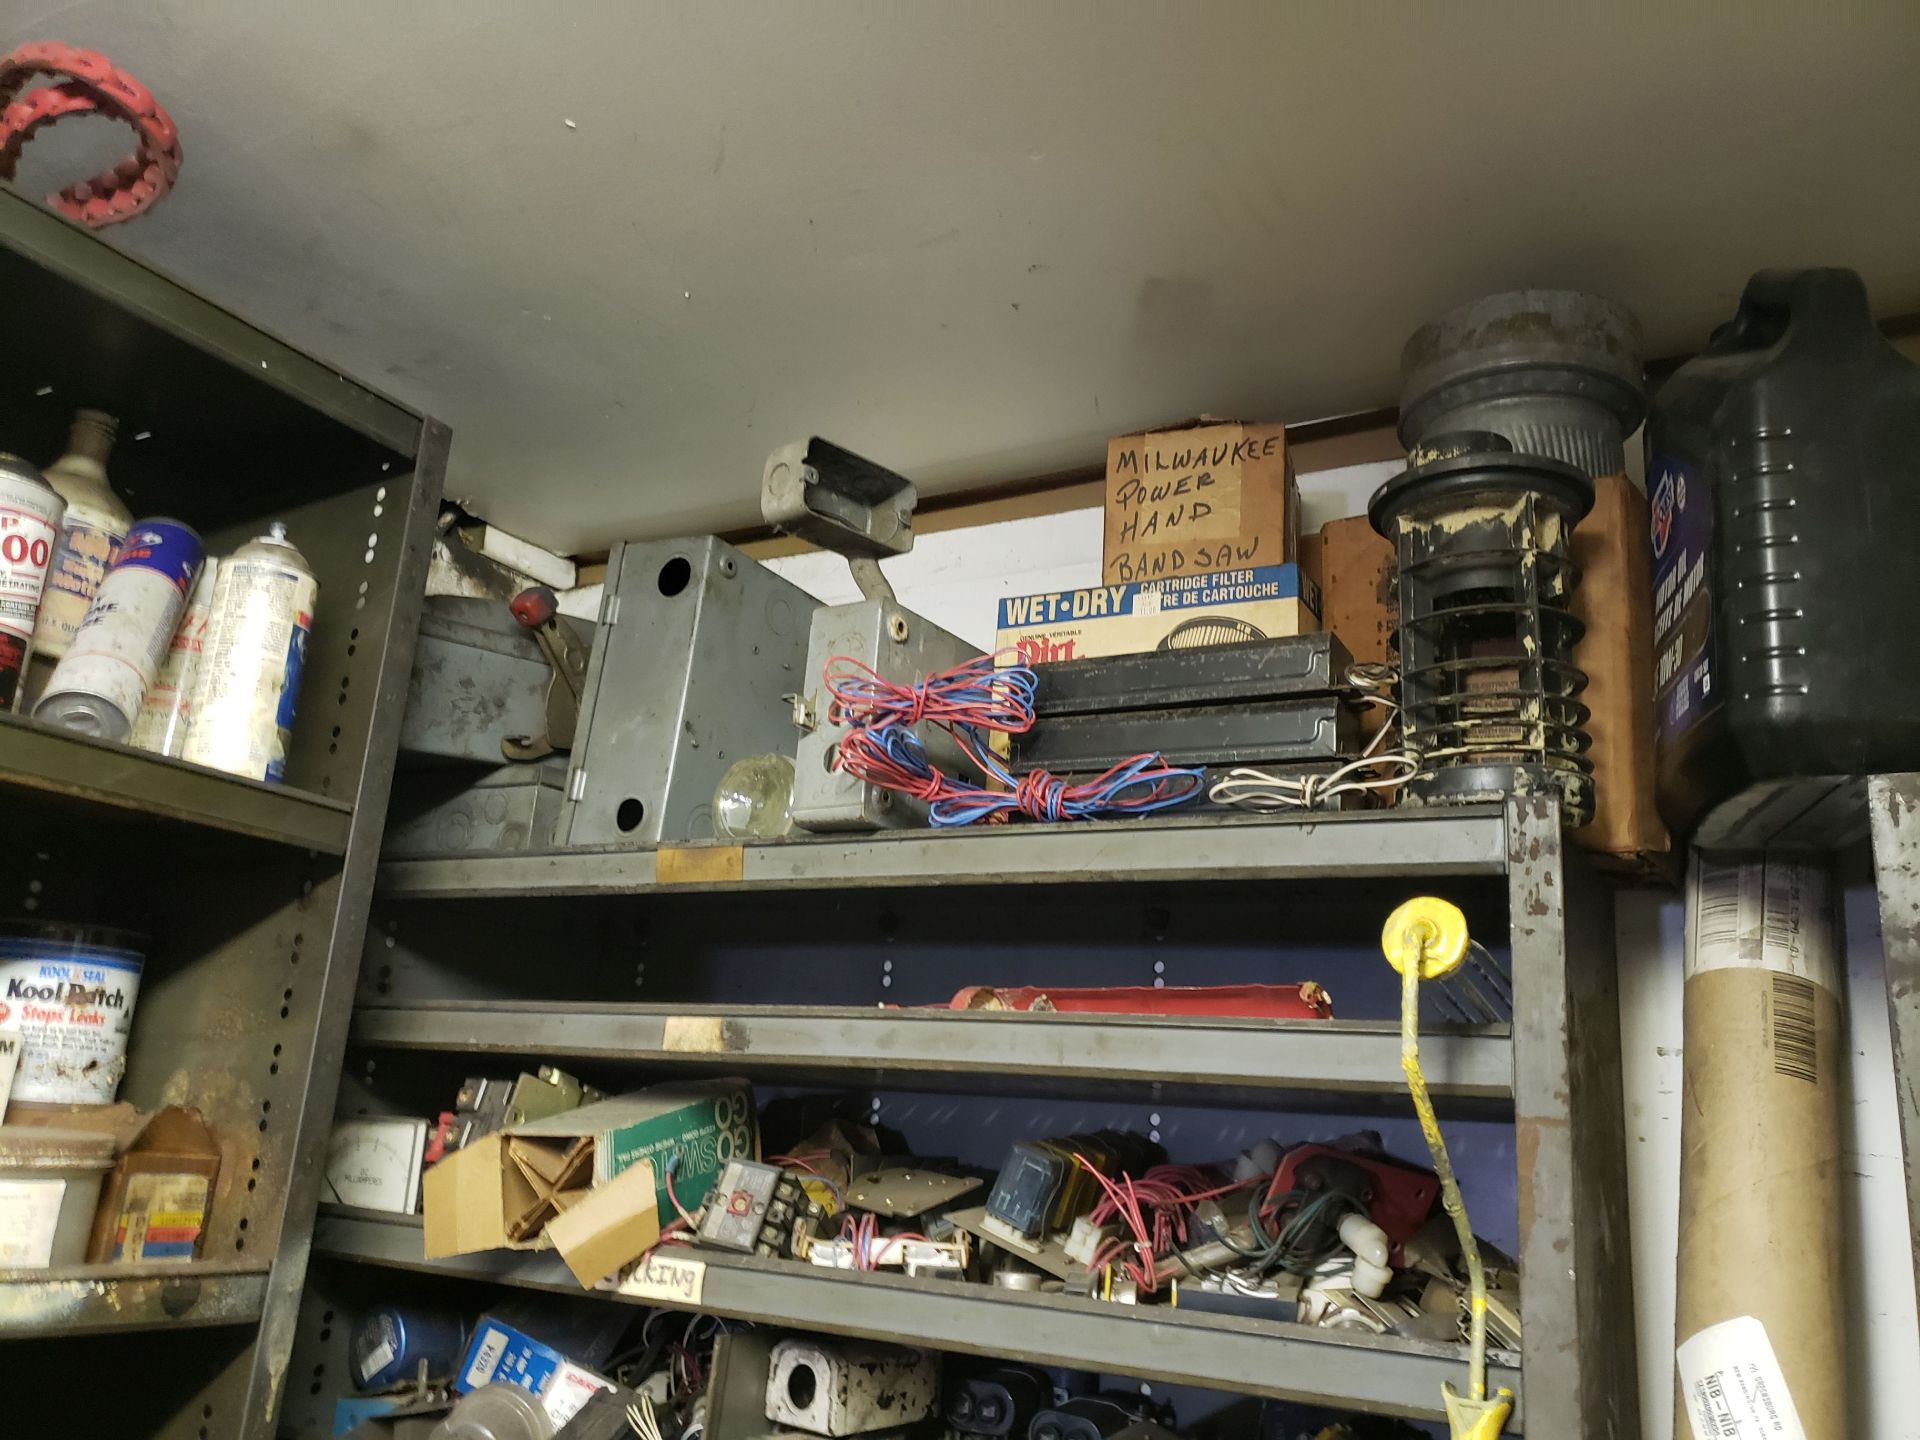 BALANCE OF CONTENTS OF MAINTENANCE ROOM 9 SHELVES & CONTENTS - FASTENERS, ELECTRICAL, FITTINGS, - Image 7 of 10